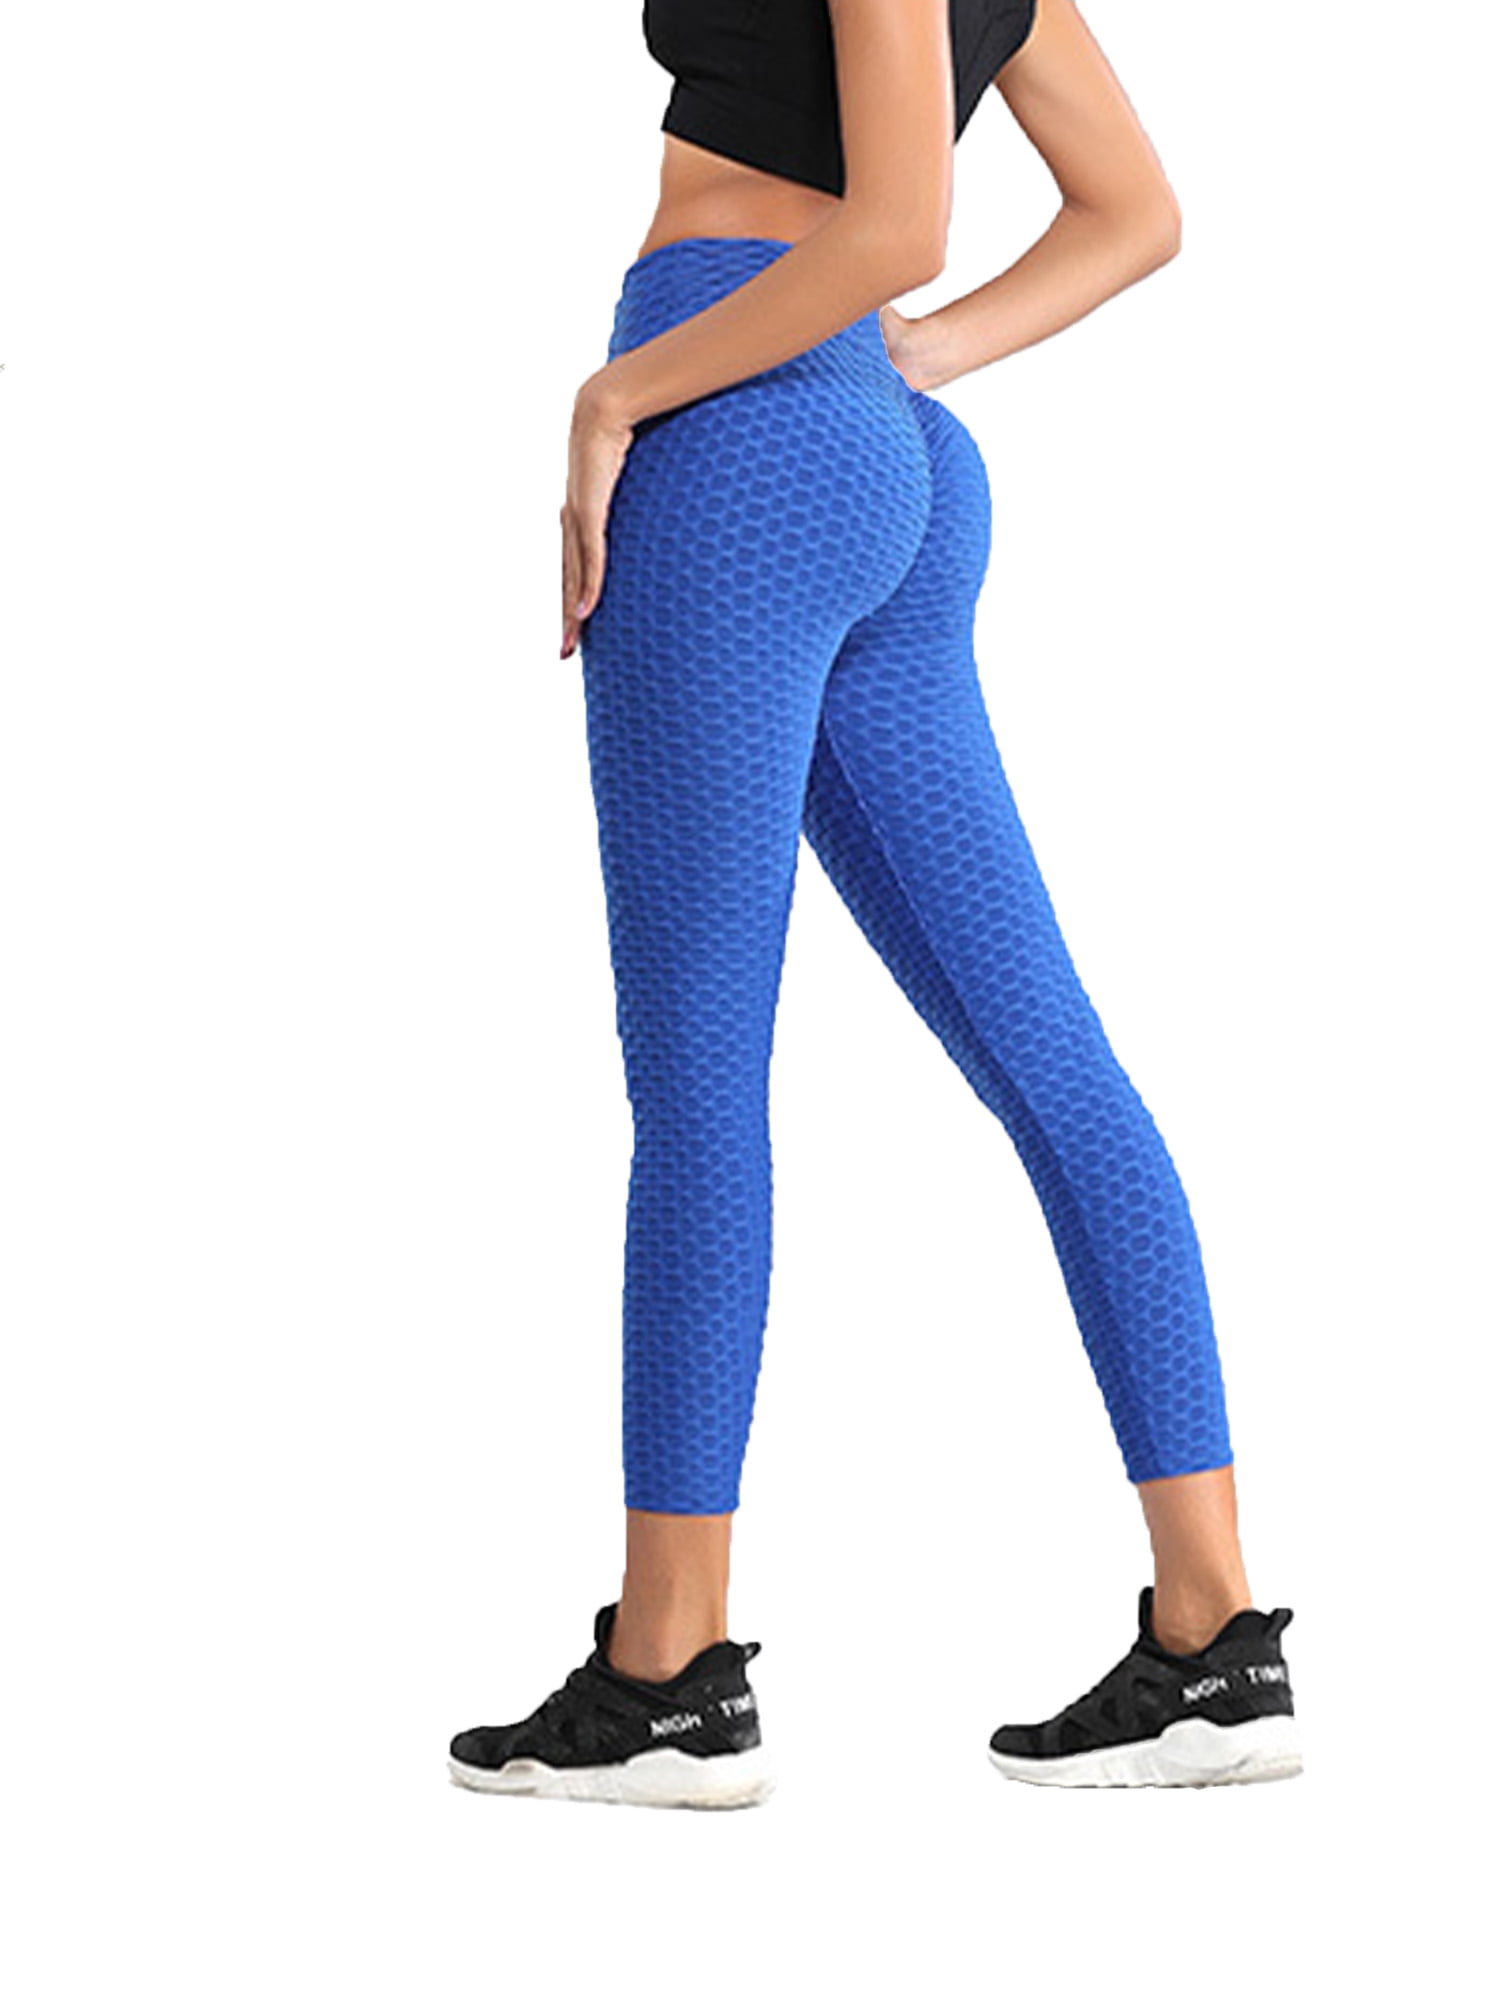 Women Anti-Cellulite Yoga Pants High Waist Ruched Leggings Gym Trousers Athletic 